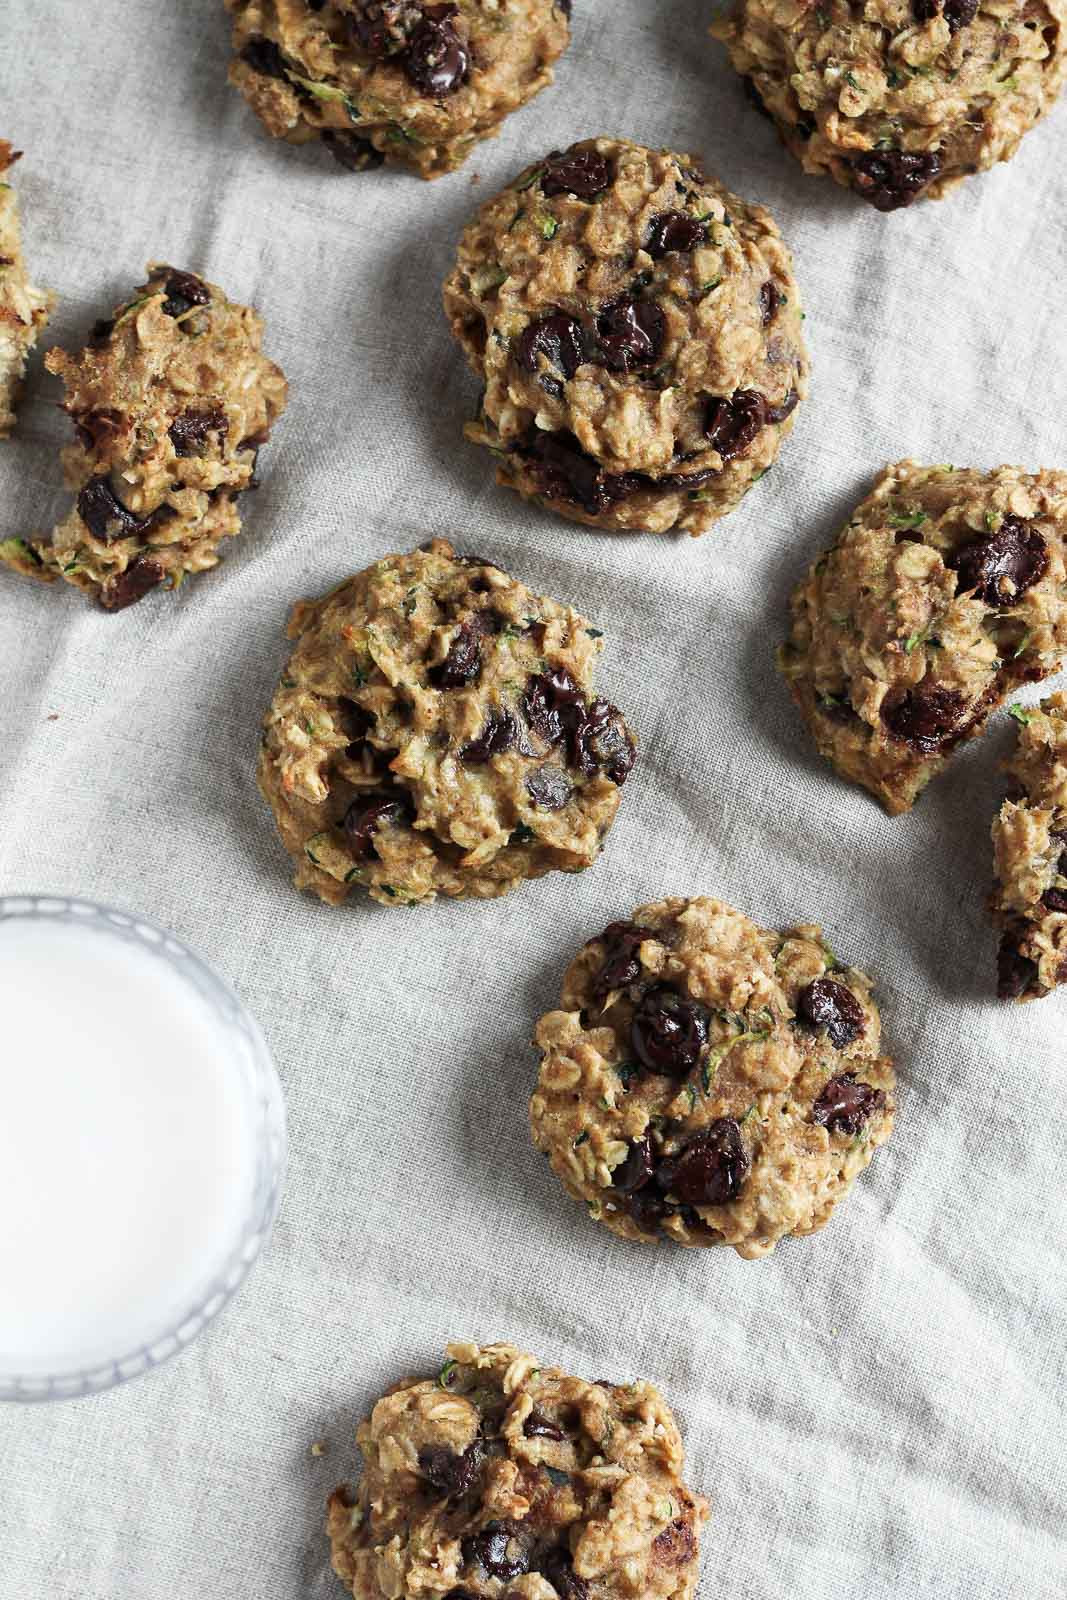 Chocolate Chip Oatmeal Cookies Healthy
 Healthy Chocolate Chip Zucchini Oatmeal Cookies